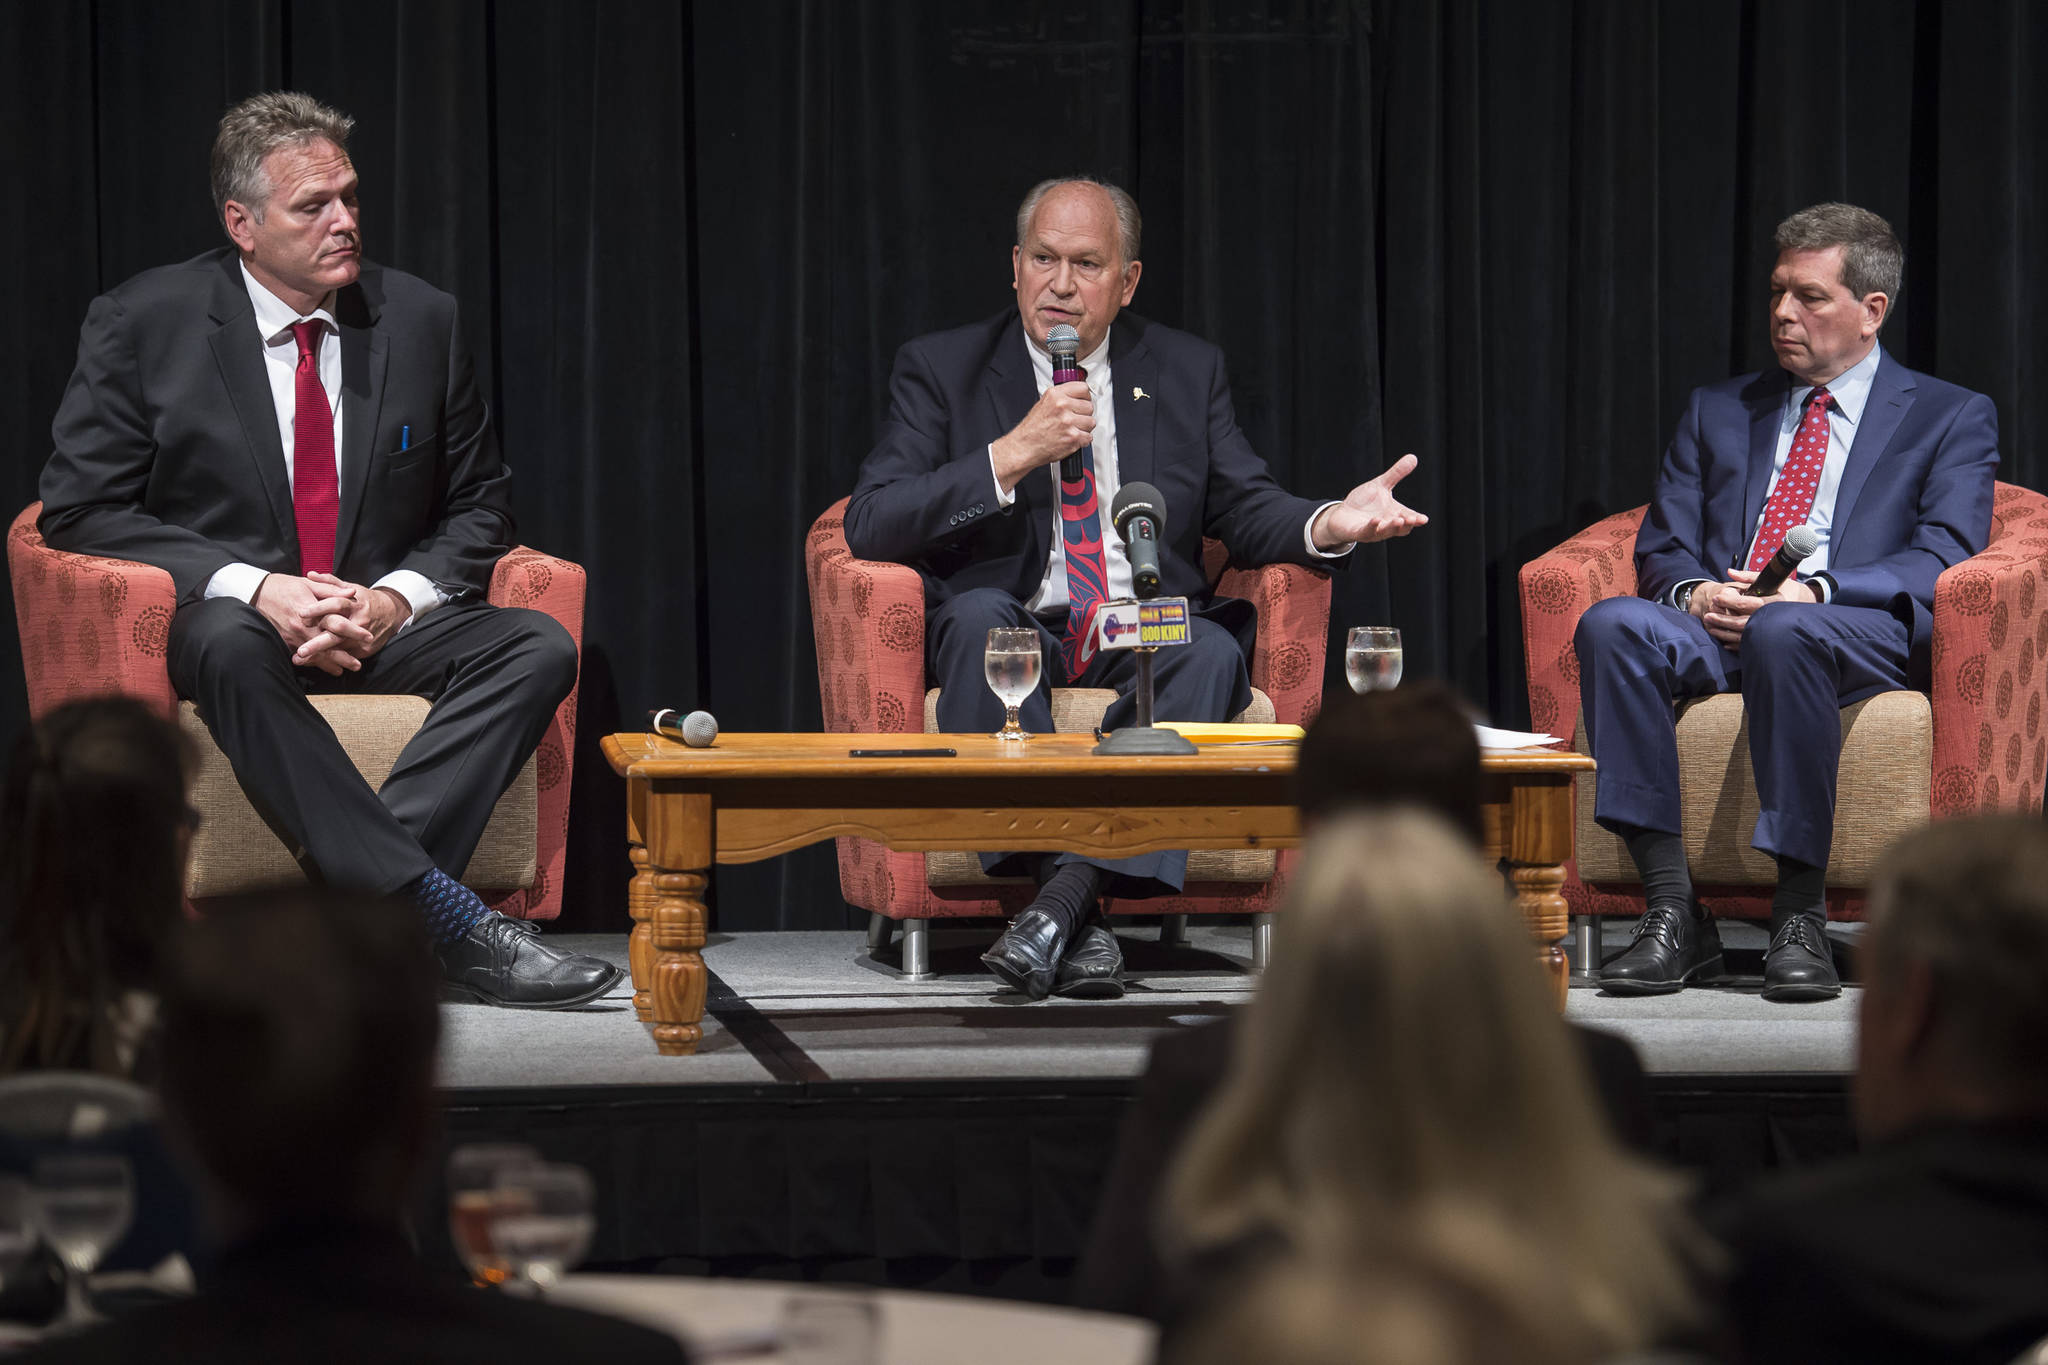 Former state Senate Mike Dunleavy, left, Gov. Bill Walker, center, and former U.S. Senator Mark Begich debate during a Juneau Chamber of Commerce luncheon at Centennial Hall on Thursday, Sept. 6, 2018. Polls and financial disclosure forms show Dunleavy with a significant lead in the four-way governor’s race. (Michael Penn | Juneau Empire)                                Former state Senate Mike Dunleavy, left, Gov. Bill Walker, center, and former U.S. Senator Mark Begich debate during a Juneau Chamber of Commerce luncheon at Centennial Hall on Thursday, Sept. 6, 2018. (Michael Penn | Juneau Empire)